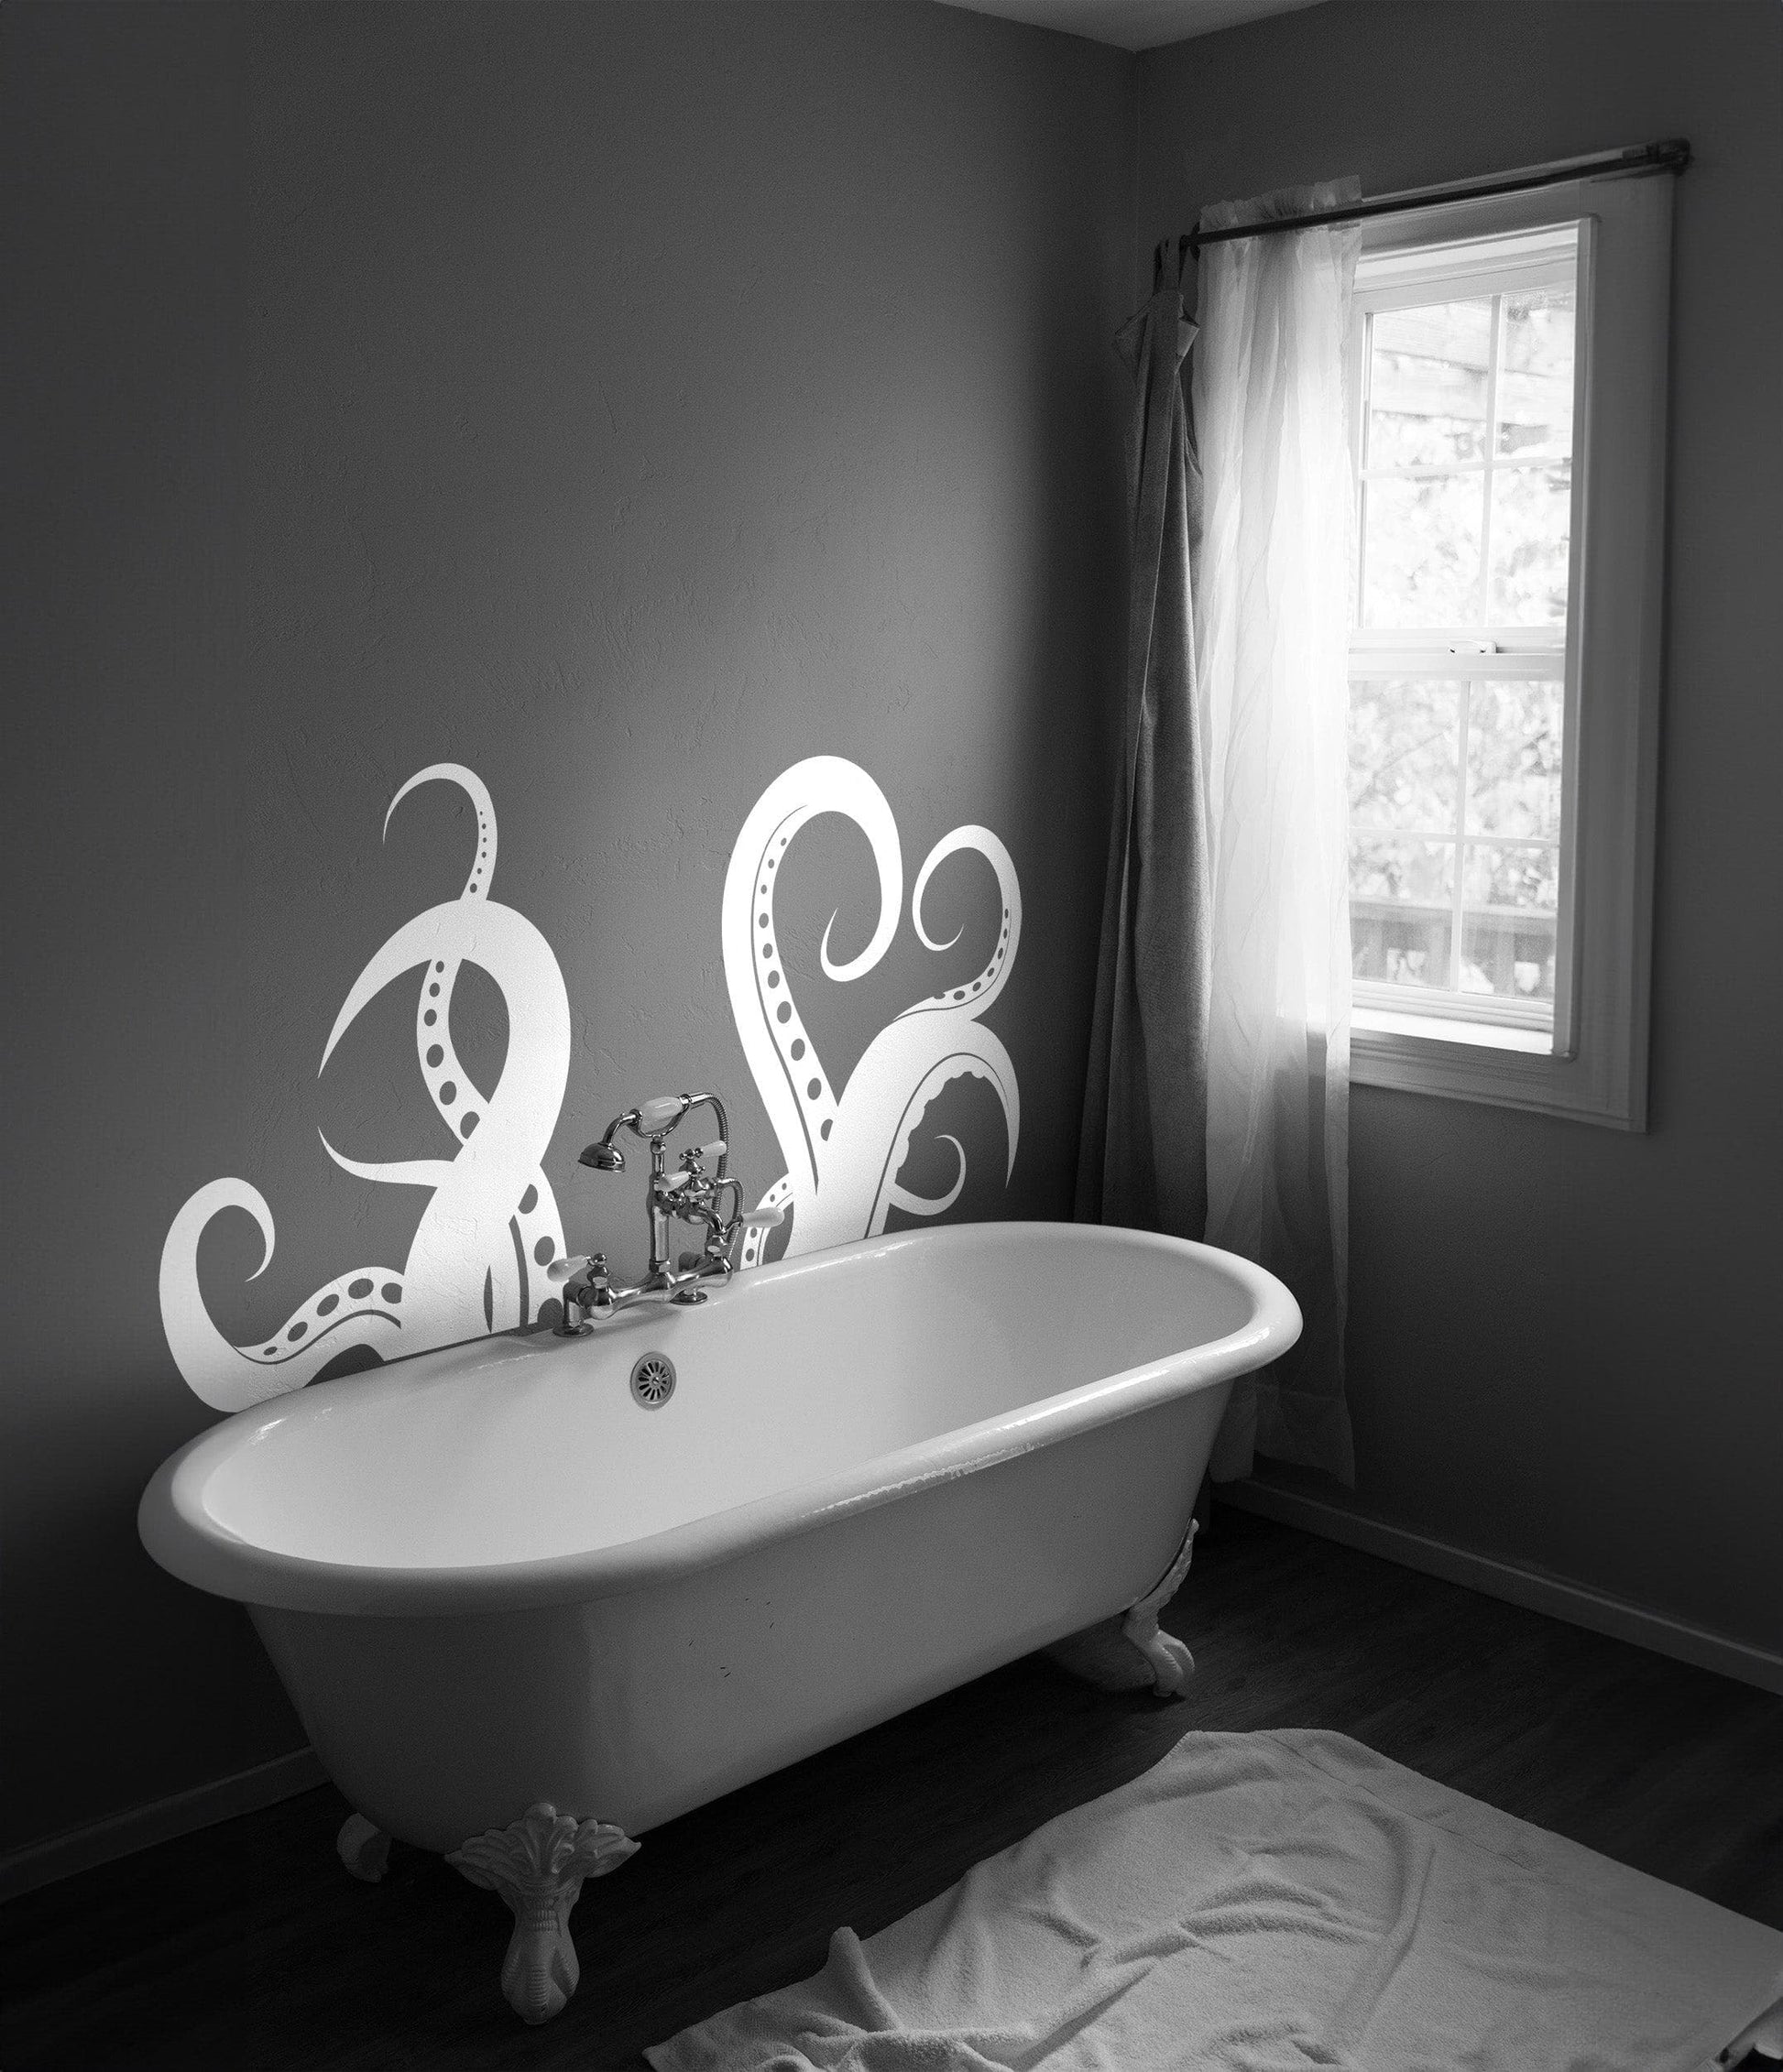 White octopus tentacles decal on a dark wall above a bathtub.